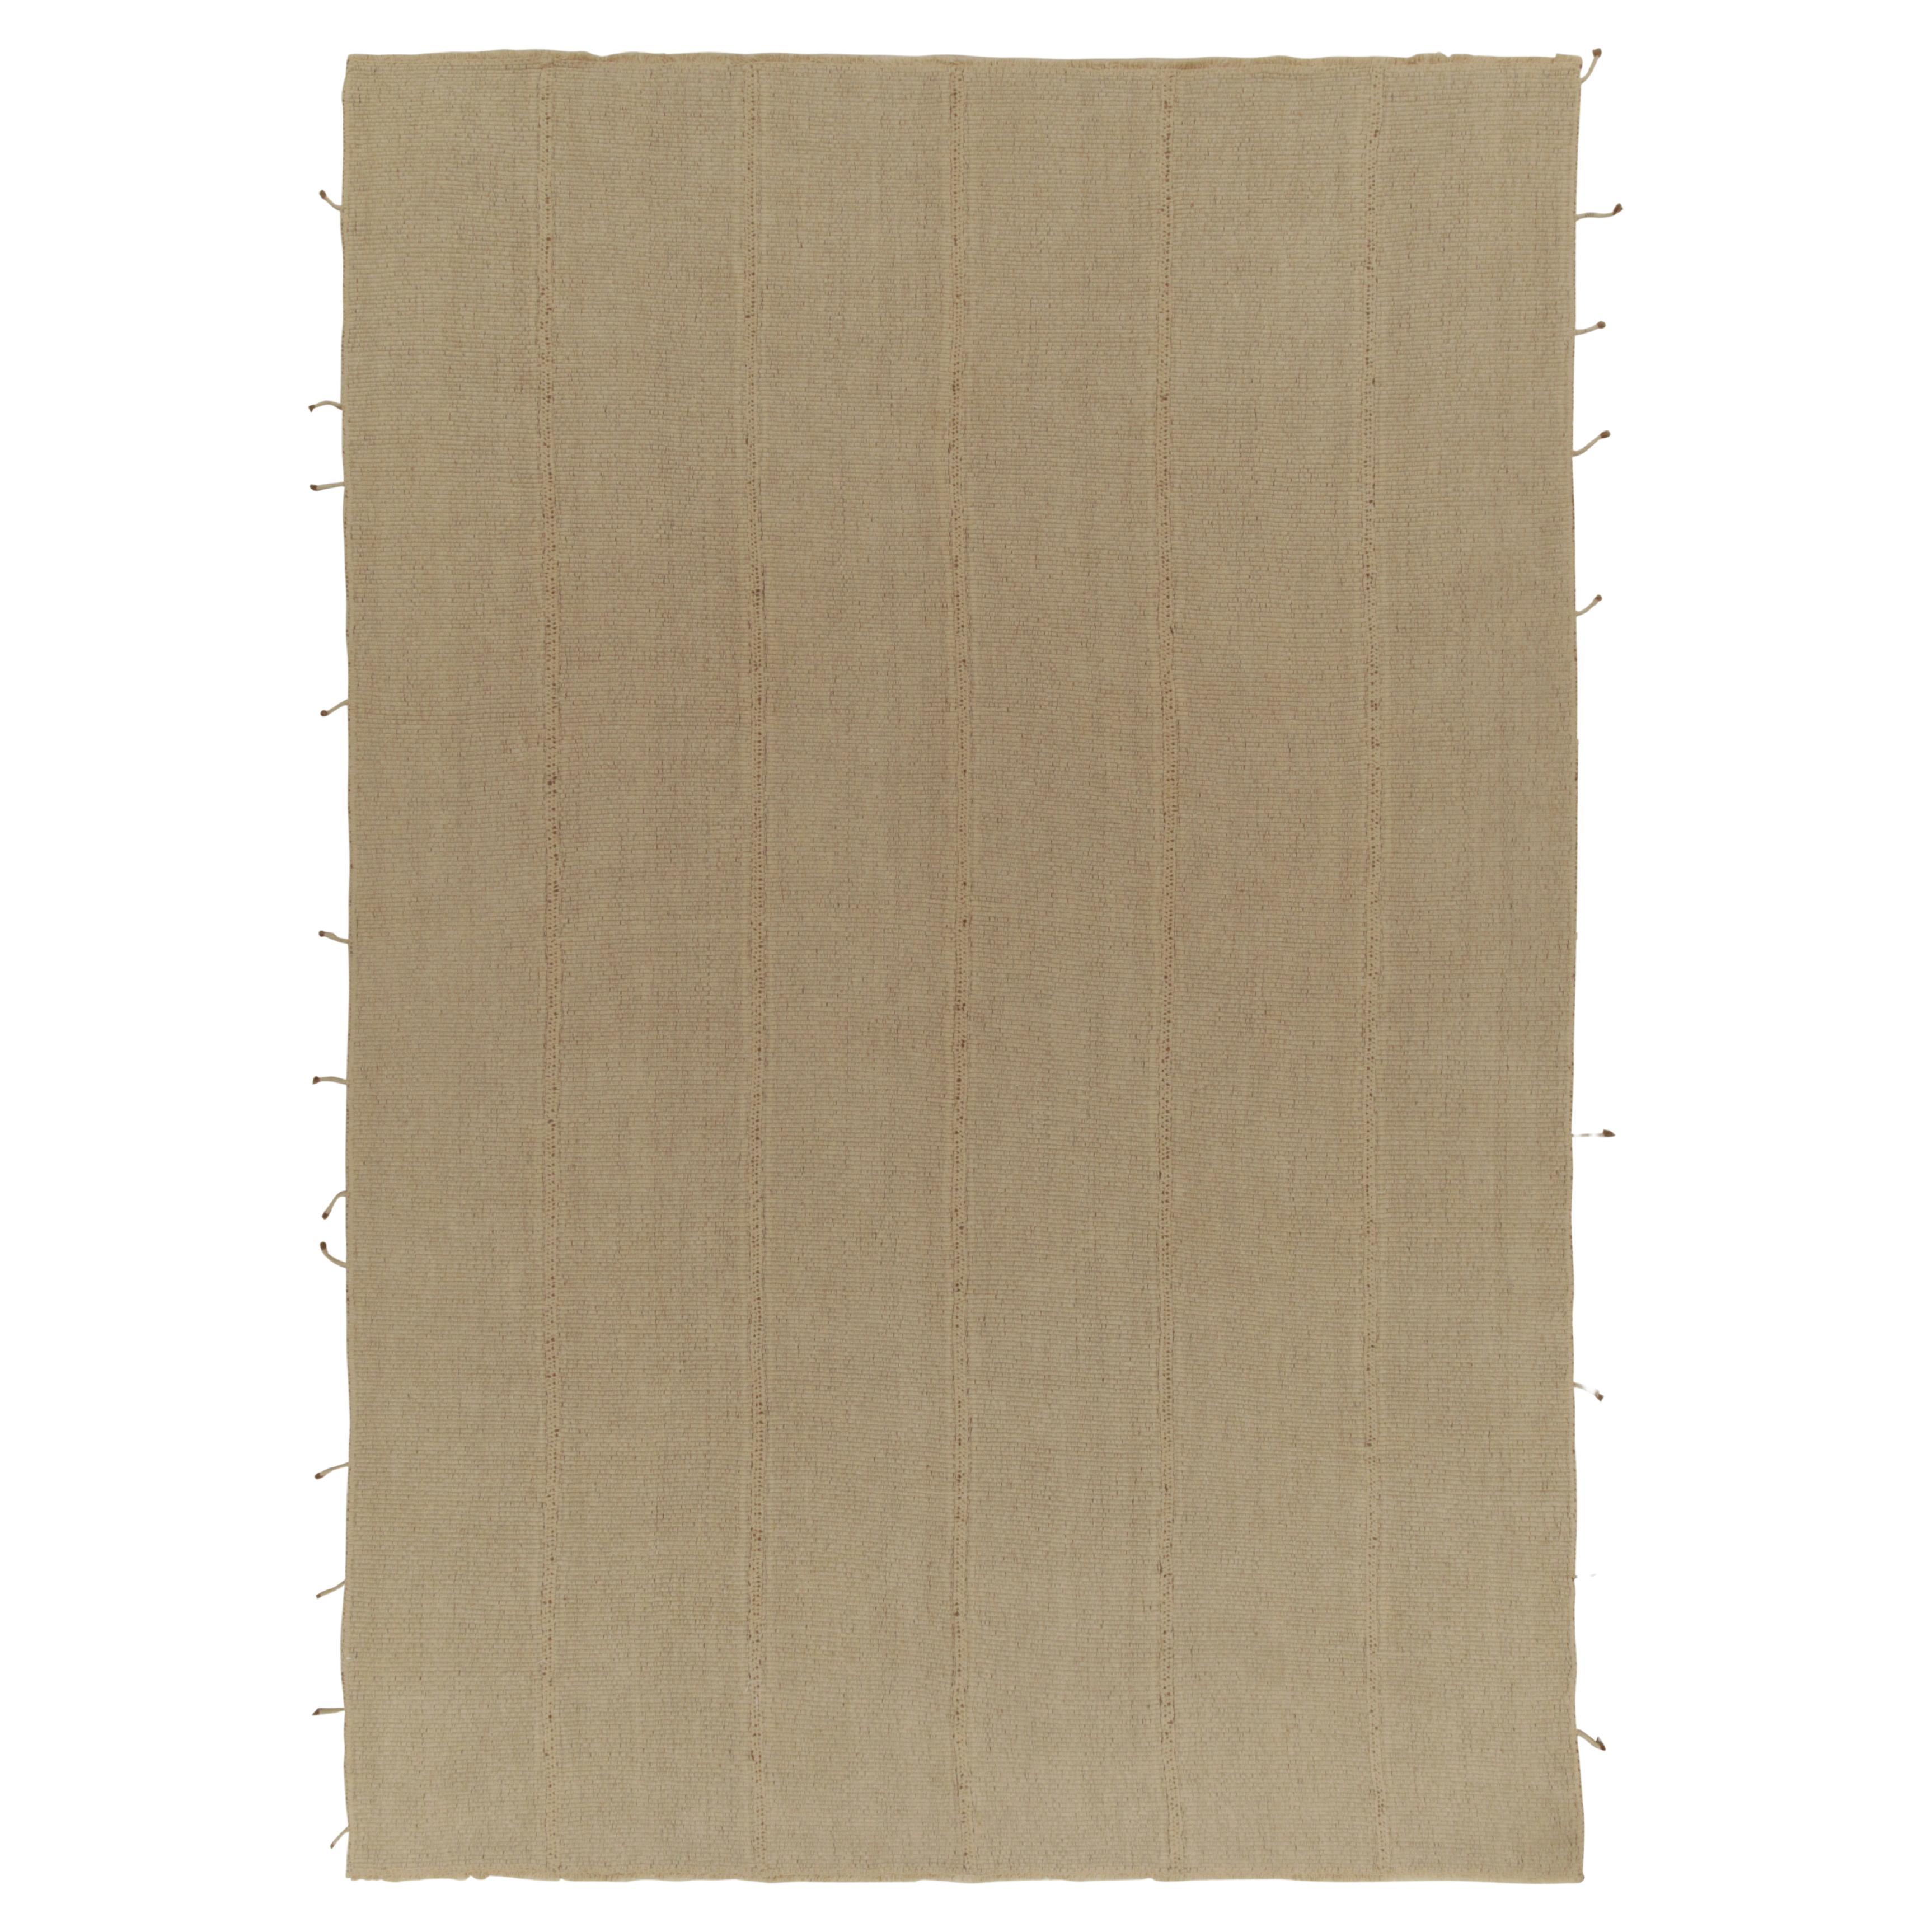 Rug & Kilim’s Contemporary Kilim in Sandy, Solid Beige-Brown Panel Woven style For Sale